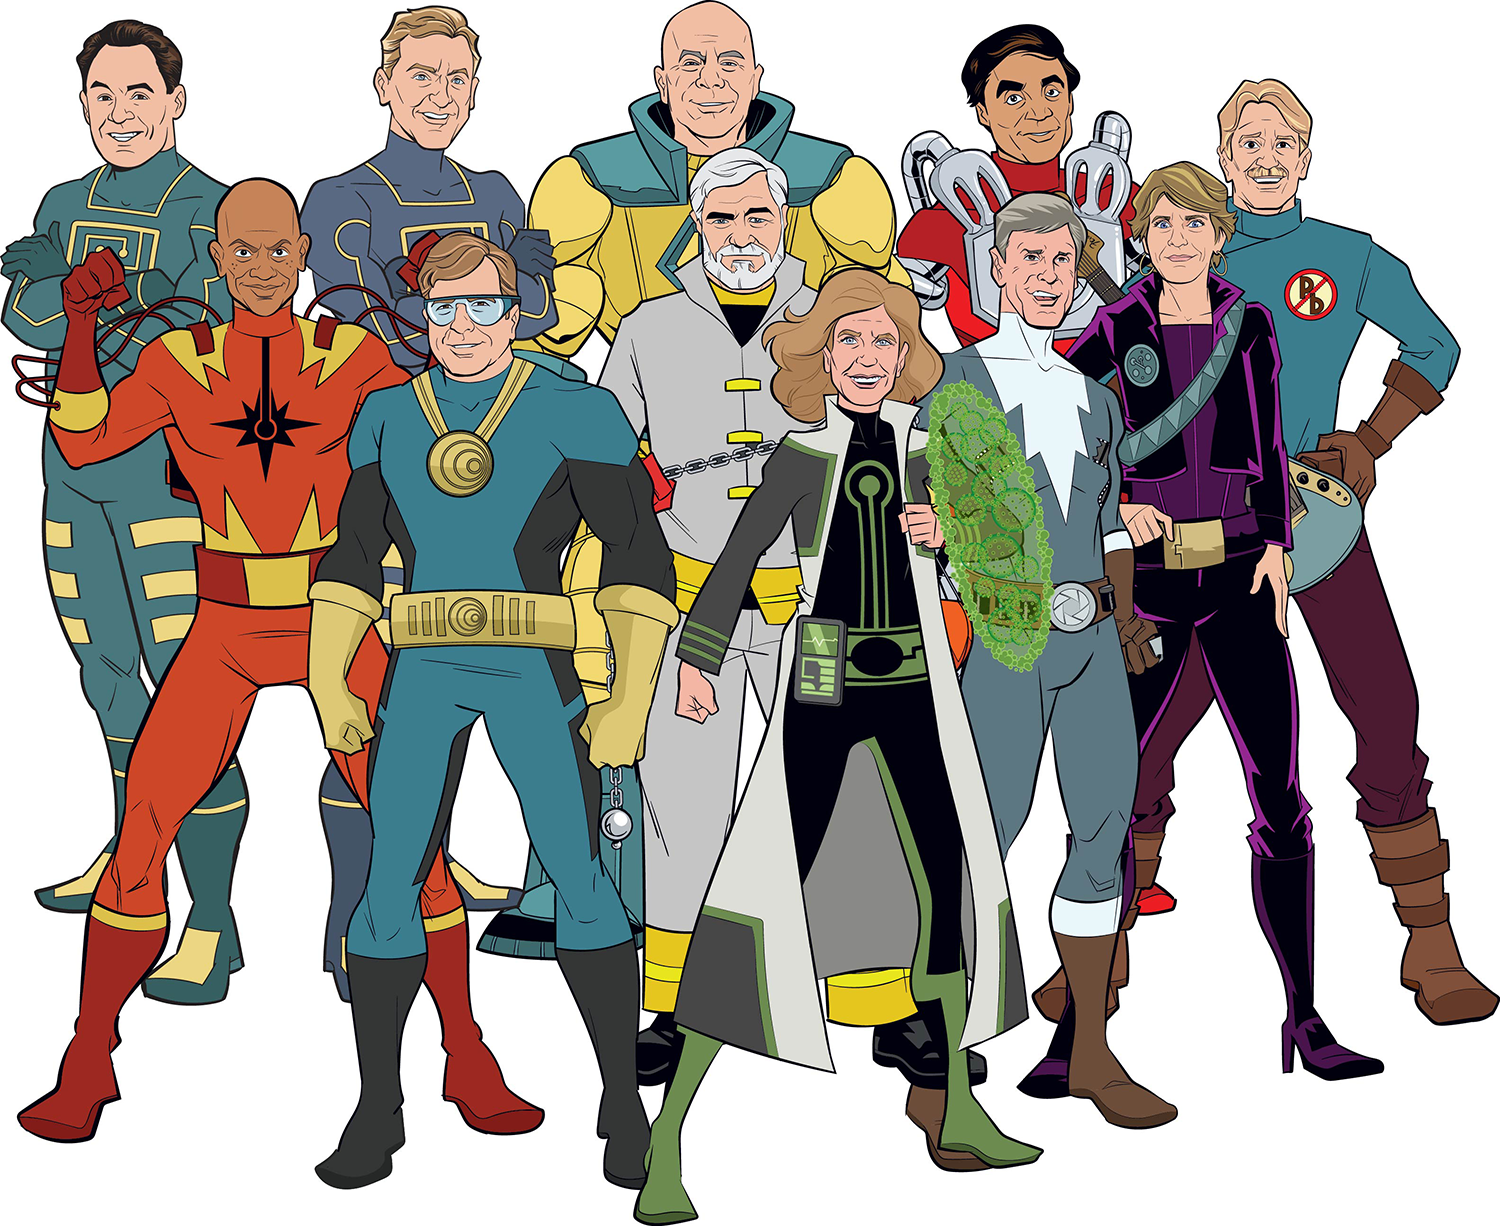 Eleven cartoon super hero characters are shown wearing multiple uniforms